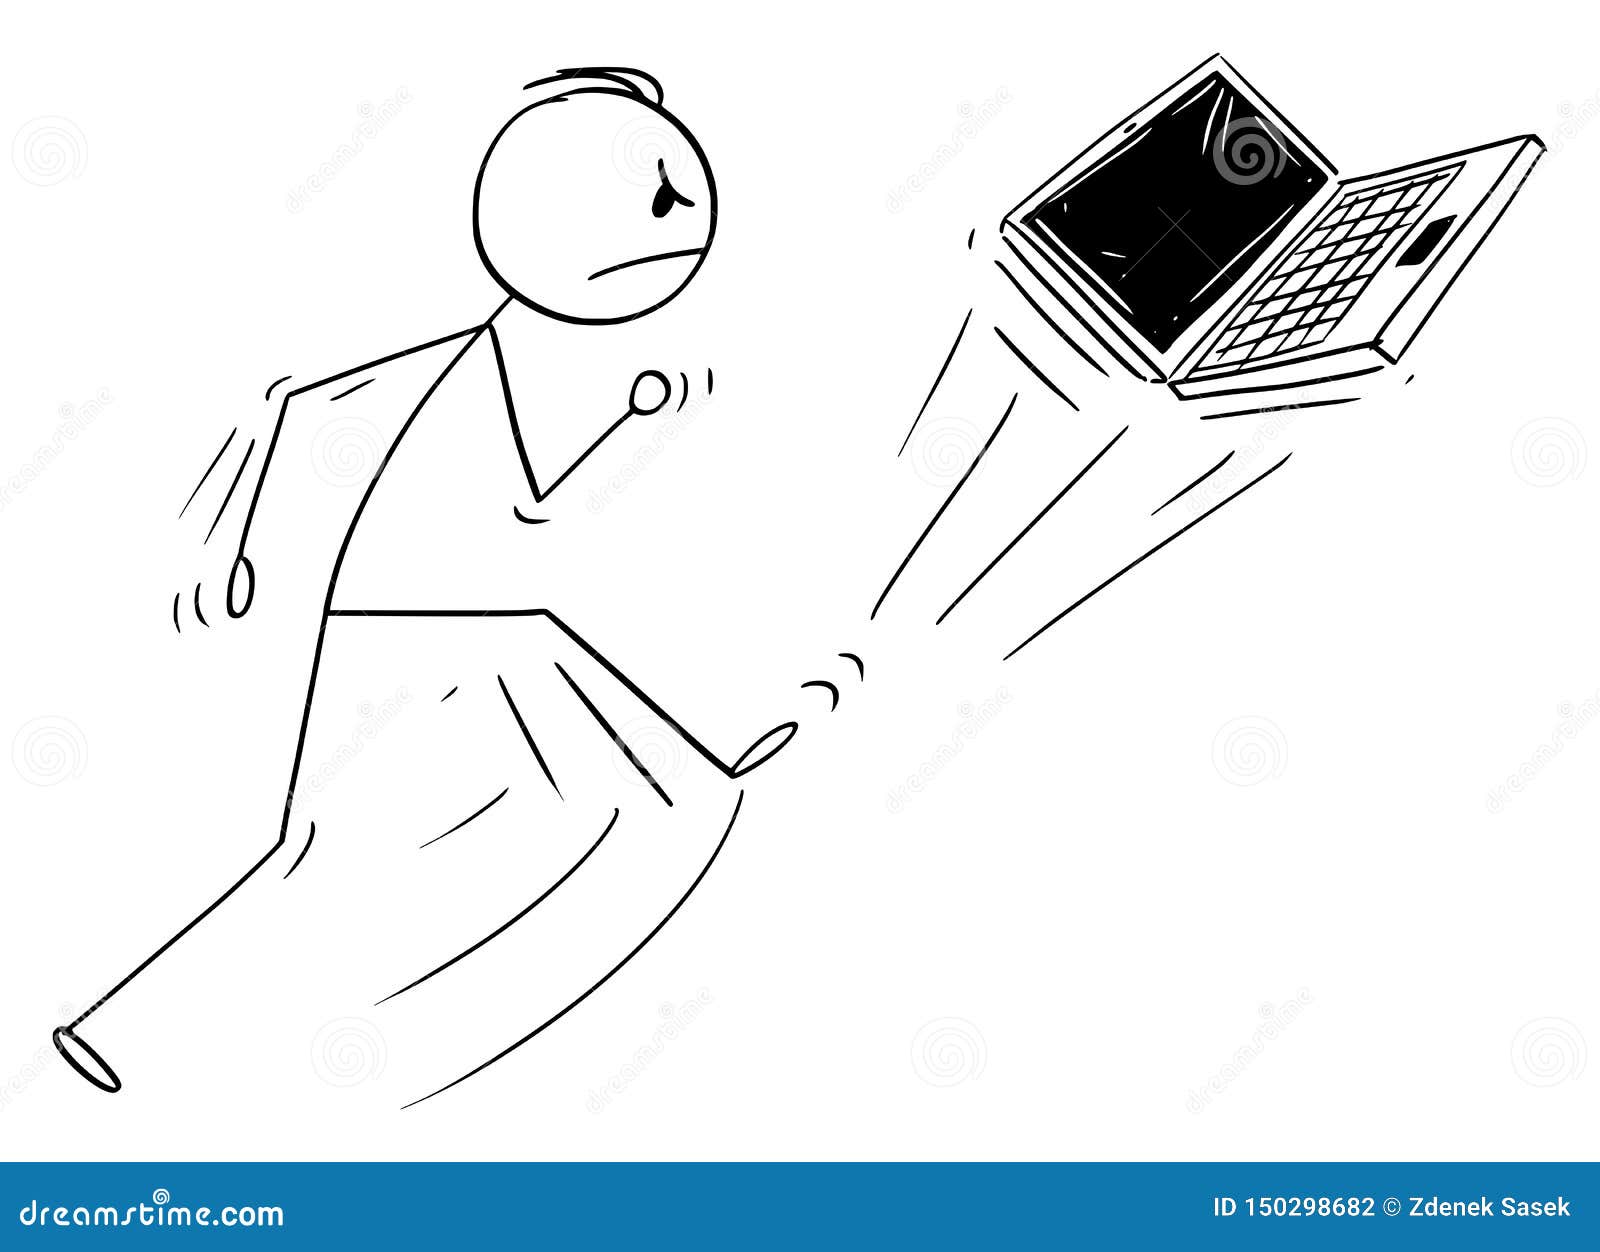  cartoon of angry man kicking out the portable computer notebook or laptop